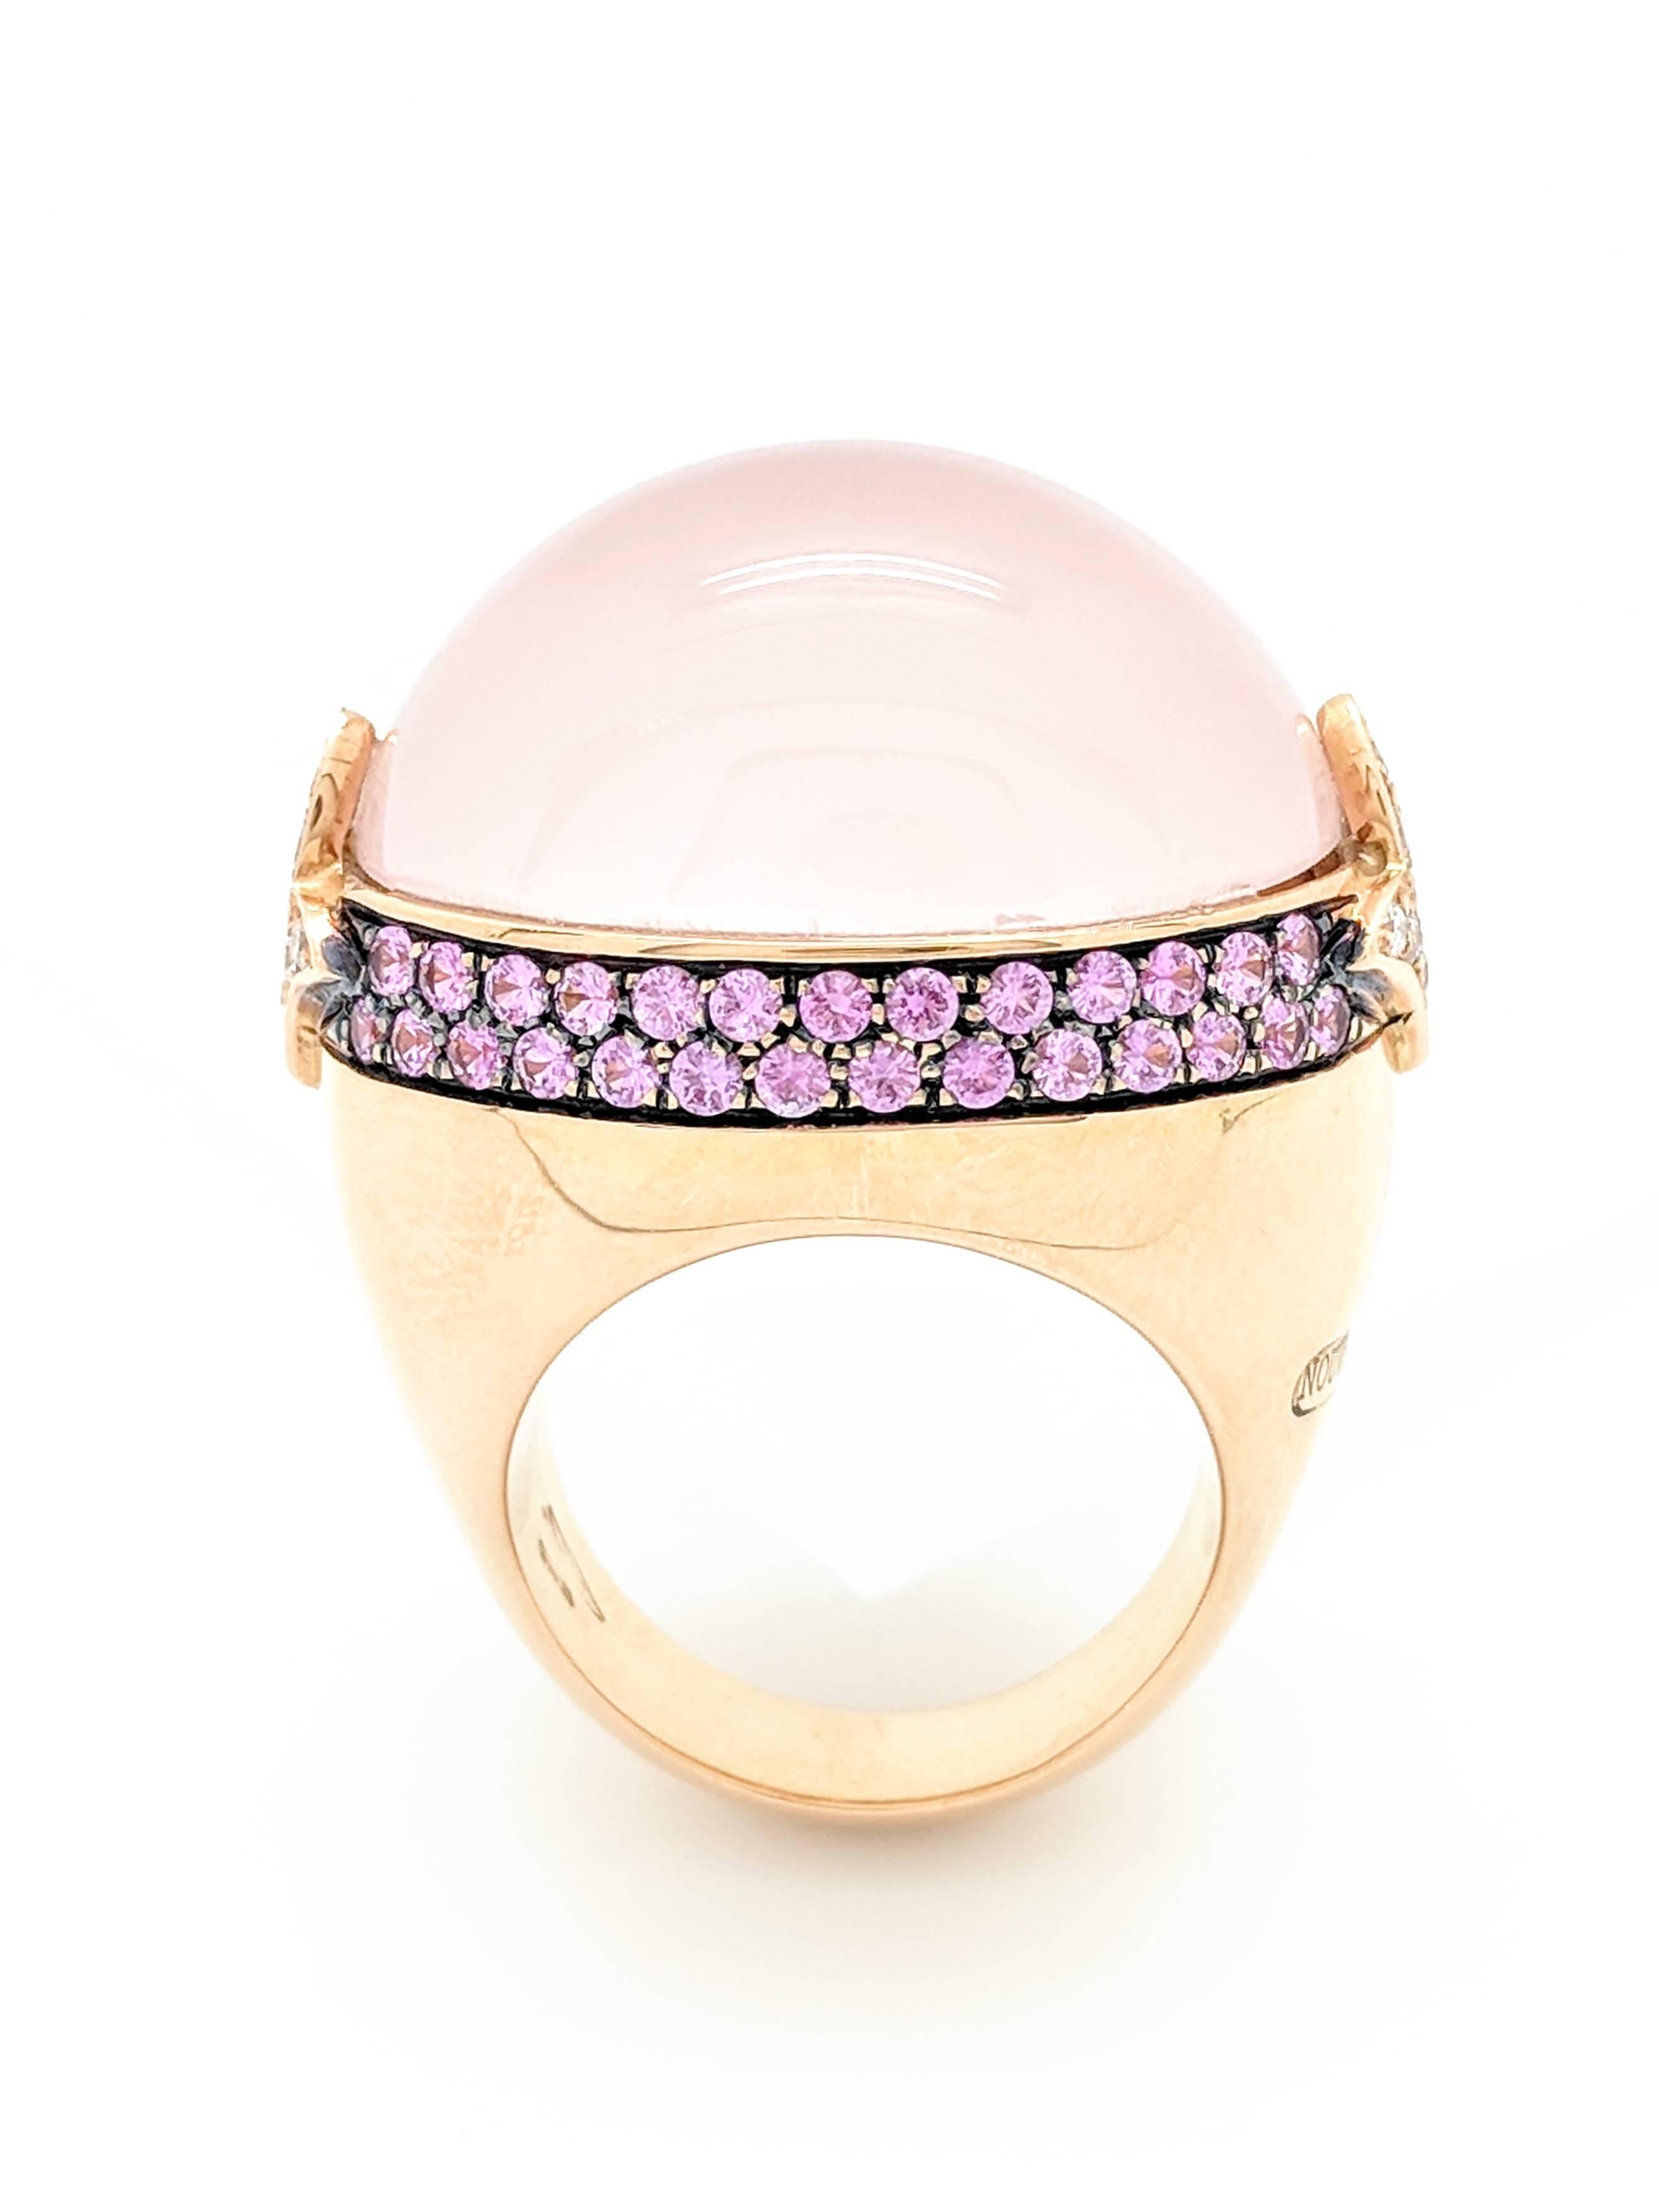 Contemporary Nouvelle Bague 18 Karat Gold Cabochon Coral Pink Sapphires and Diamond Dome Ring